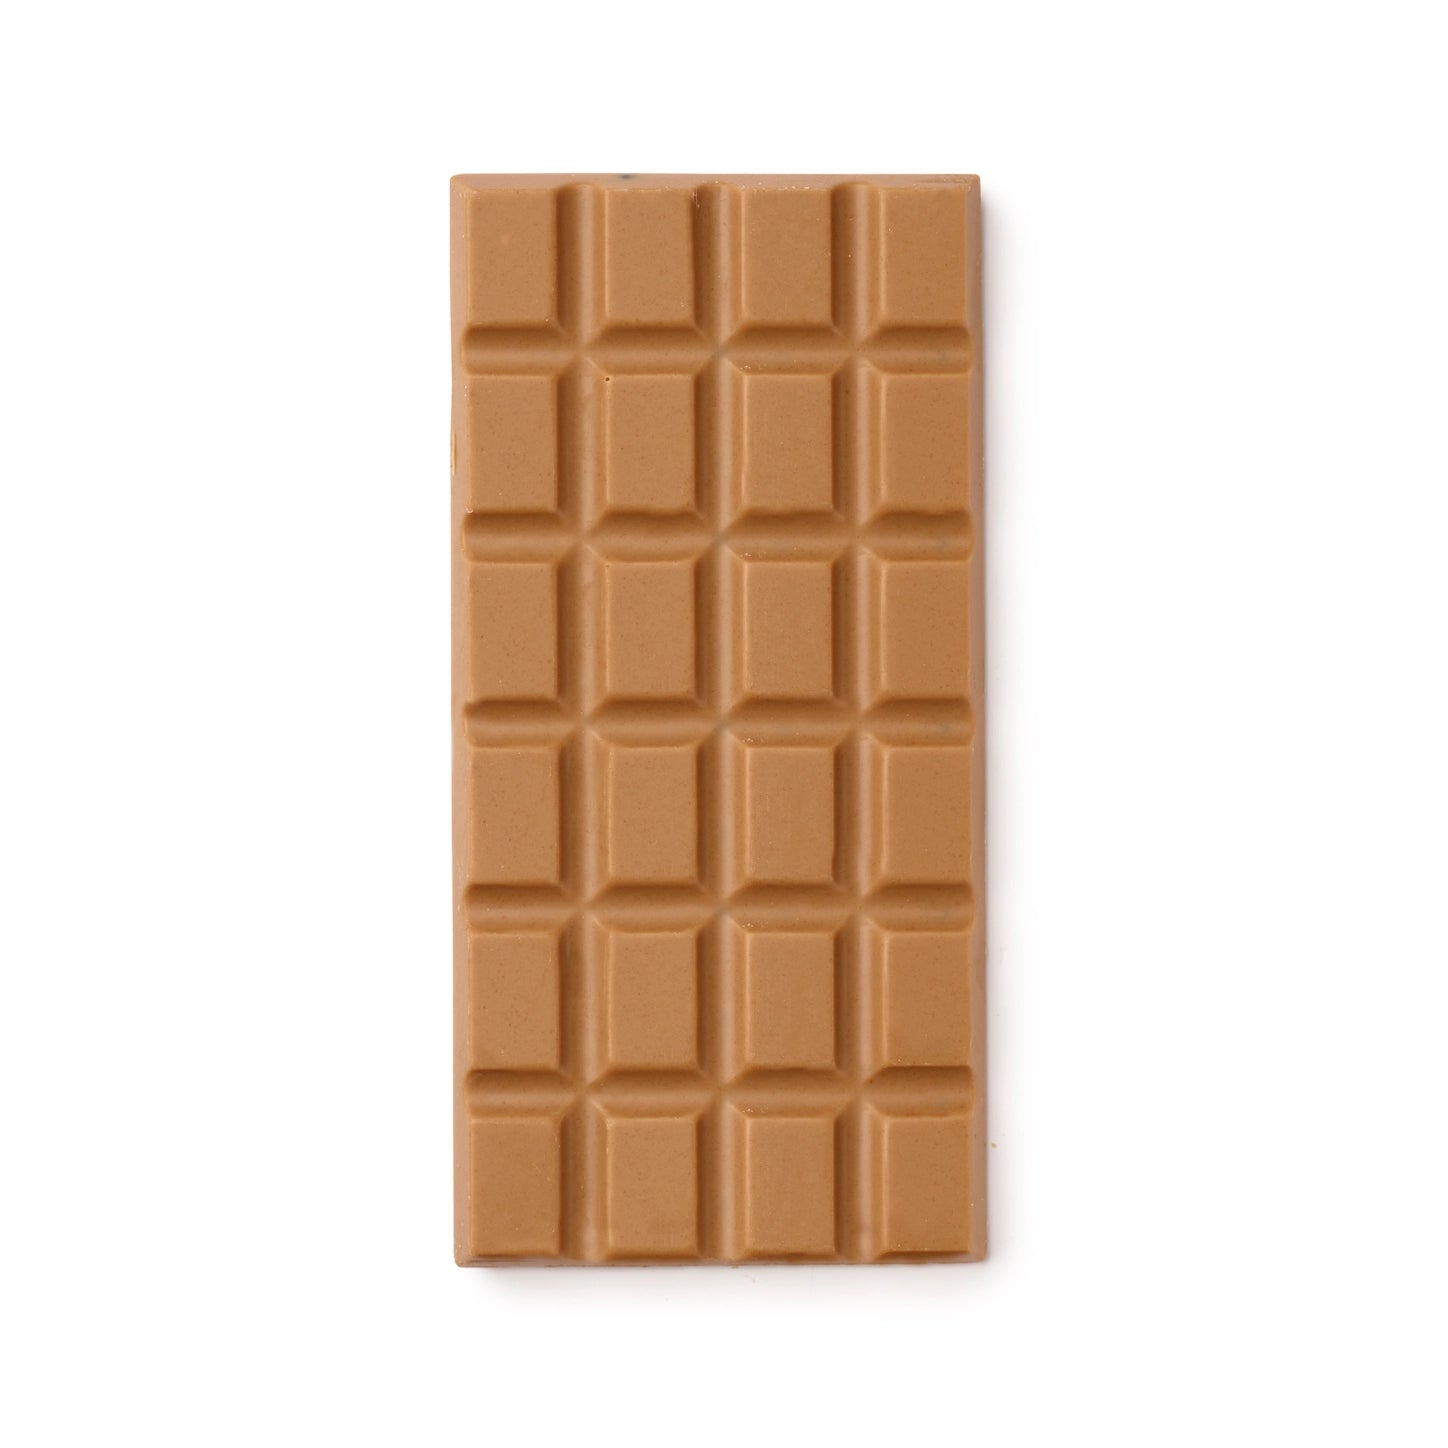 Ginger Biscuit Chocolate Bar